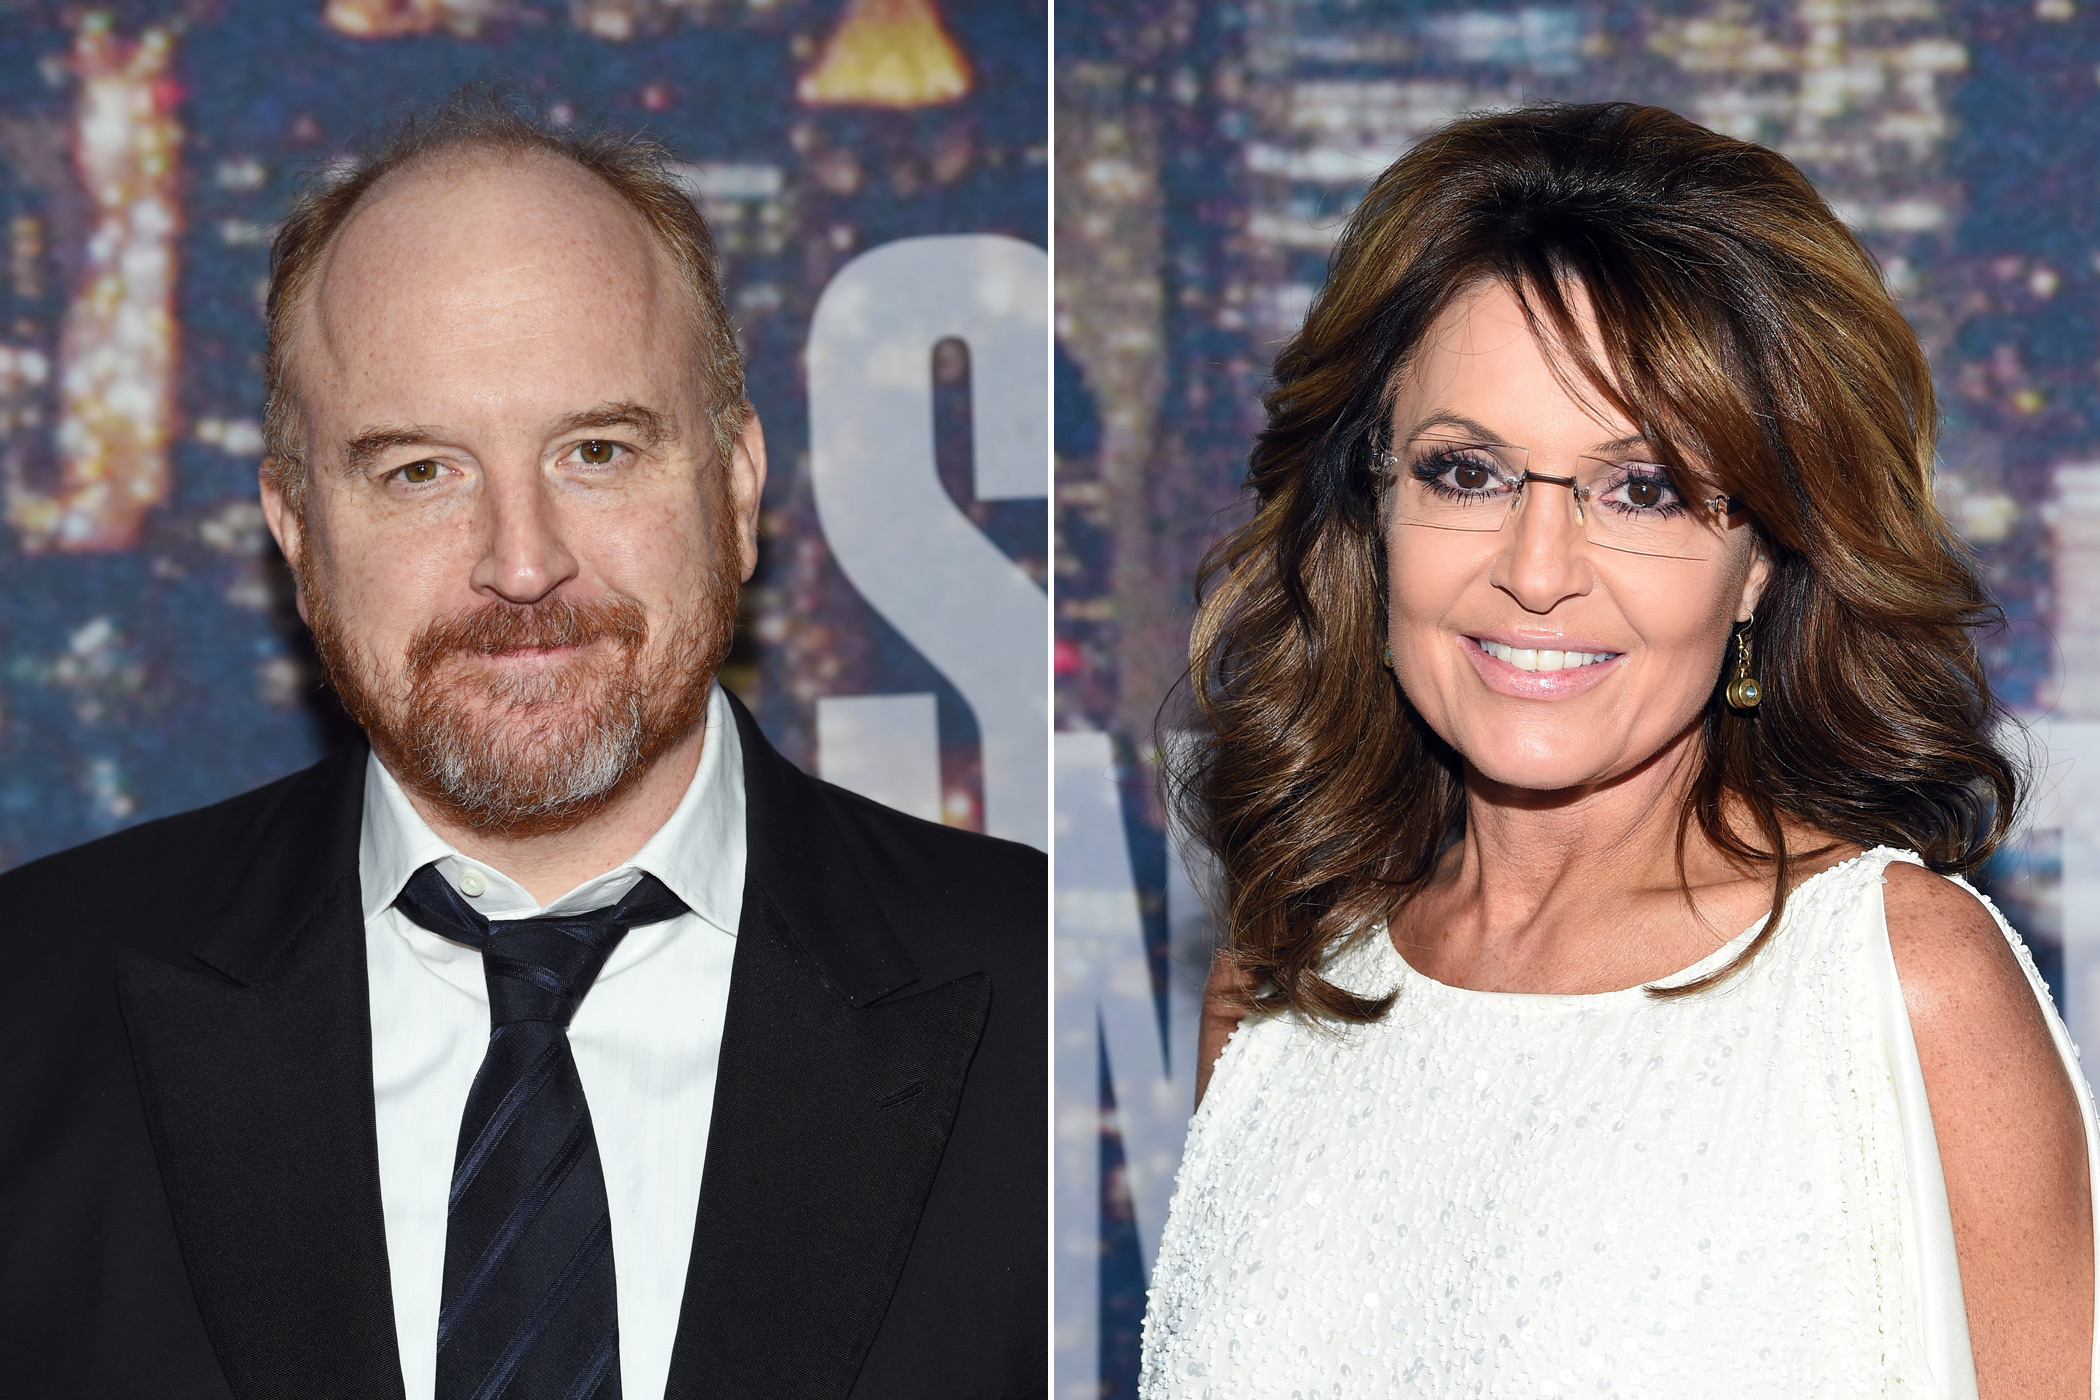 From left: Louis C.K. and Sarah Palin (Getty Images (2))